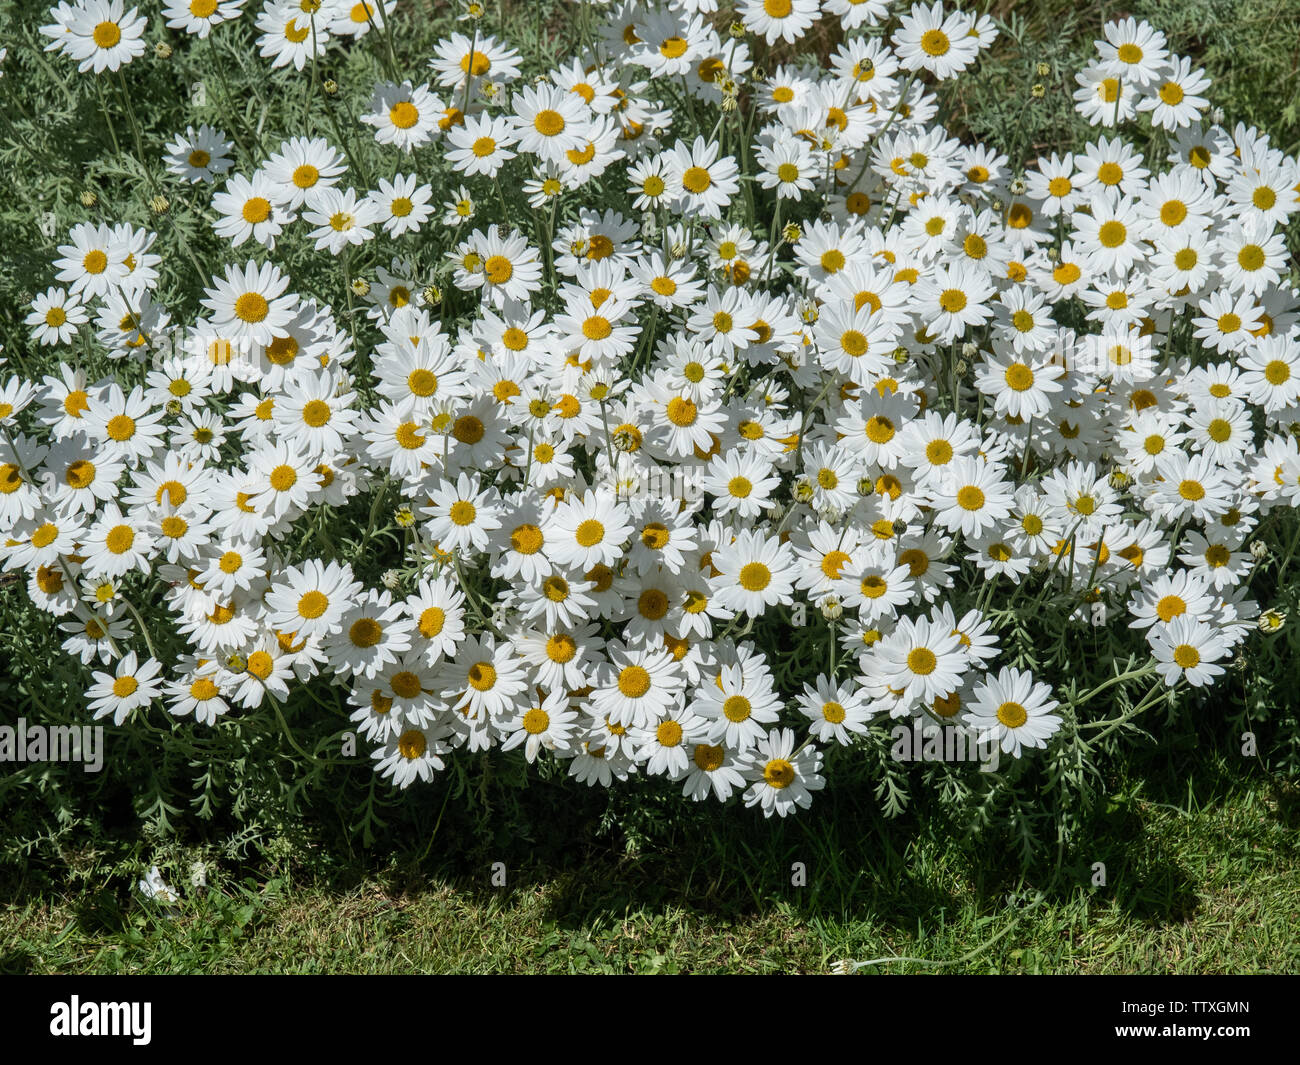 A large clump of white daisy flowered Anthemis cupaniana growing at the front of a border Stock Photo